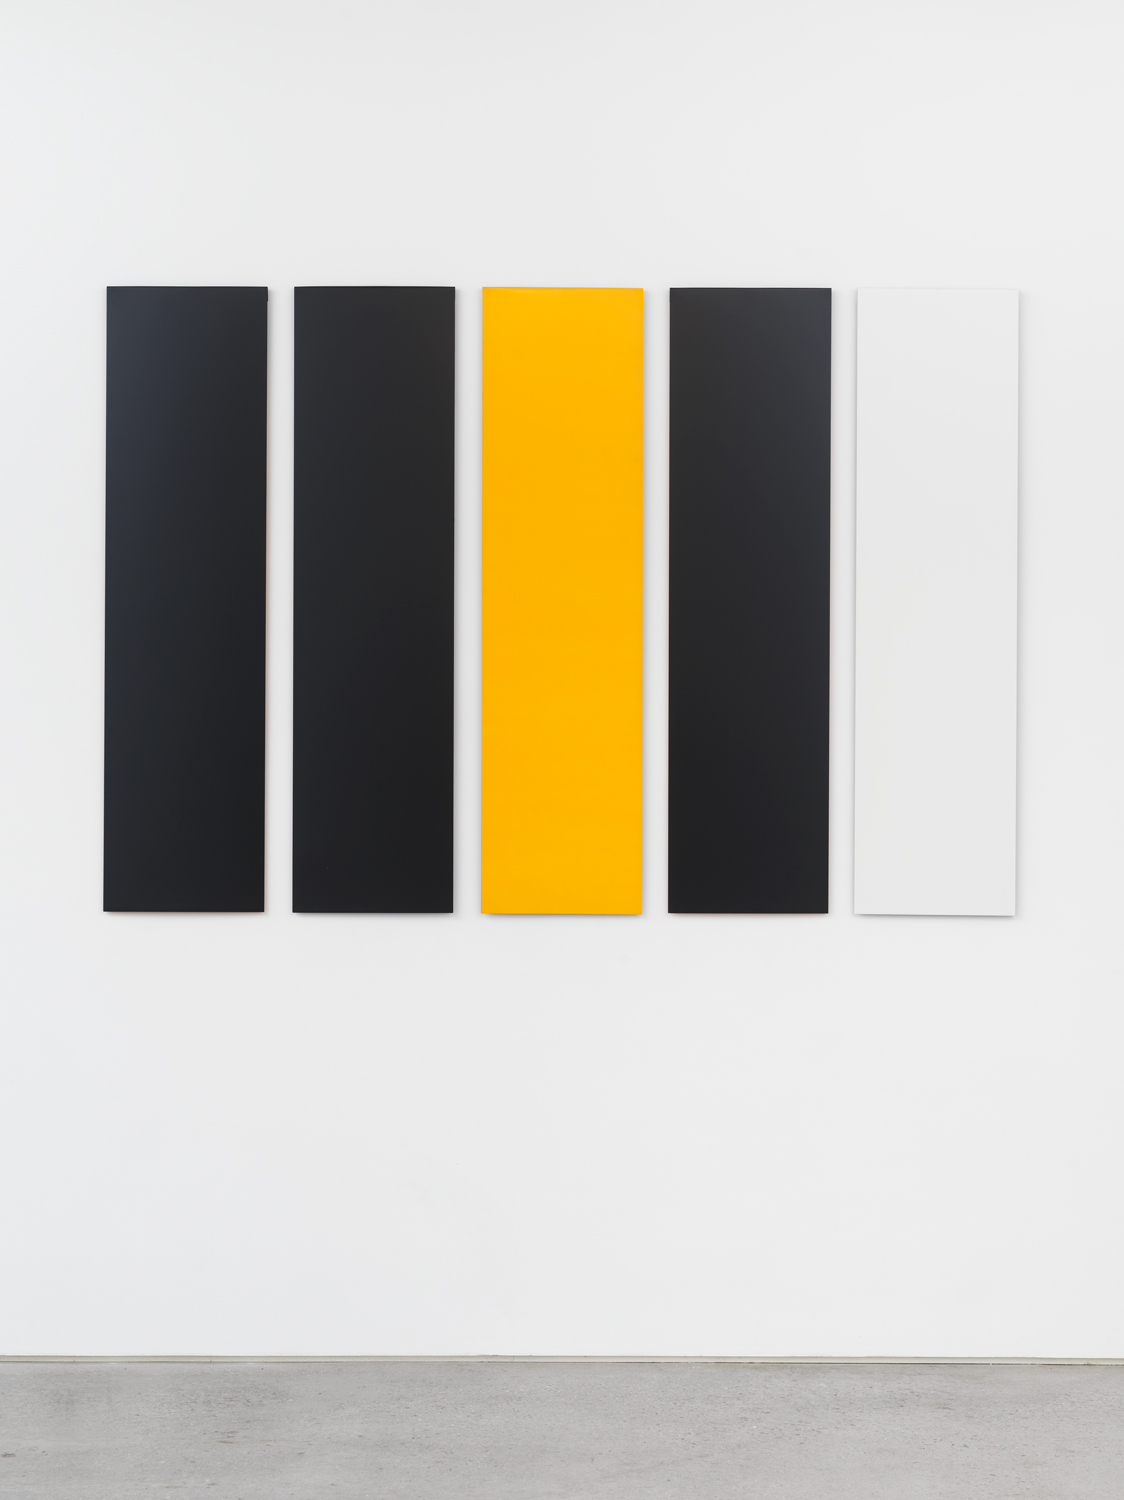 Don Dudley, Untitled (Aluminum Module), 1974/2019, Acrylic lacquer on aluminum, each module 46 3/4 x 12 in., overall 46.75 x 68 in.